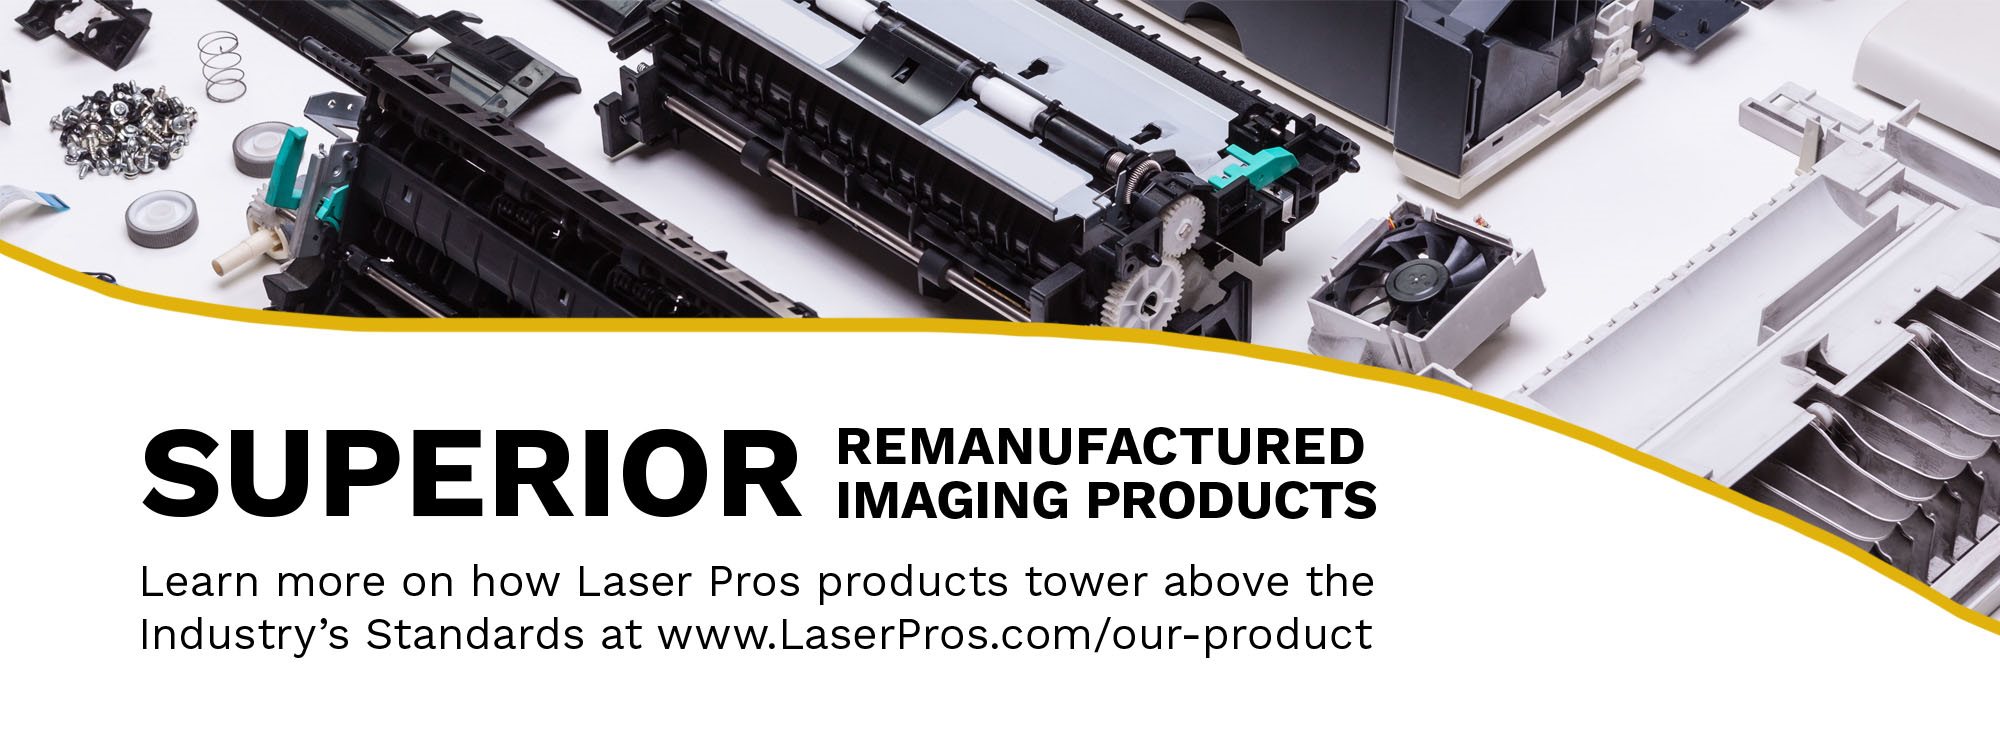 superior remanufactured products visit our product page